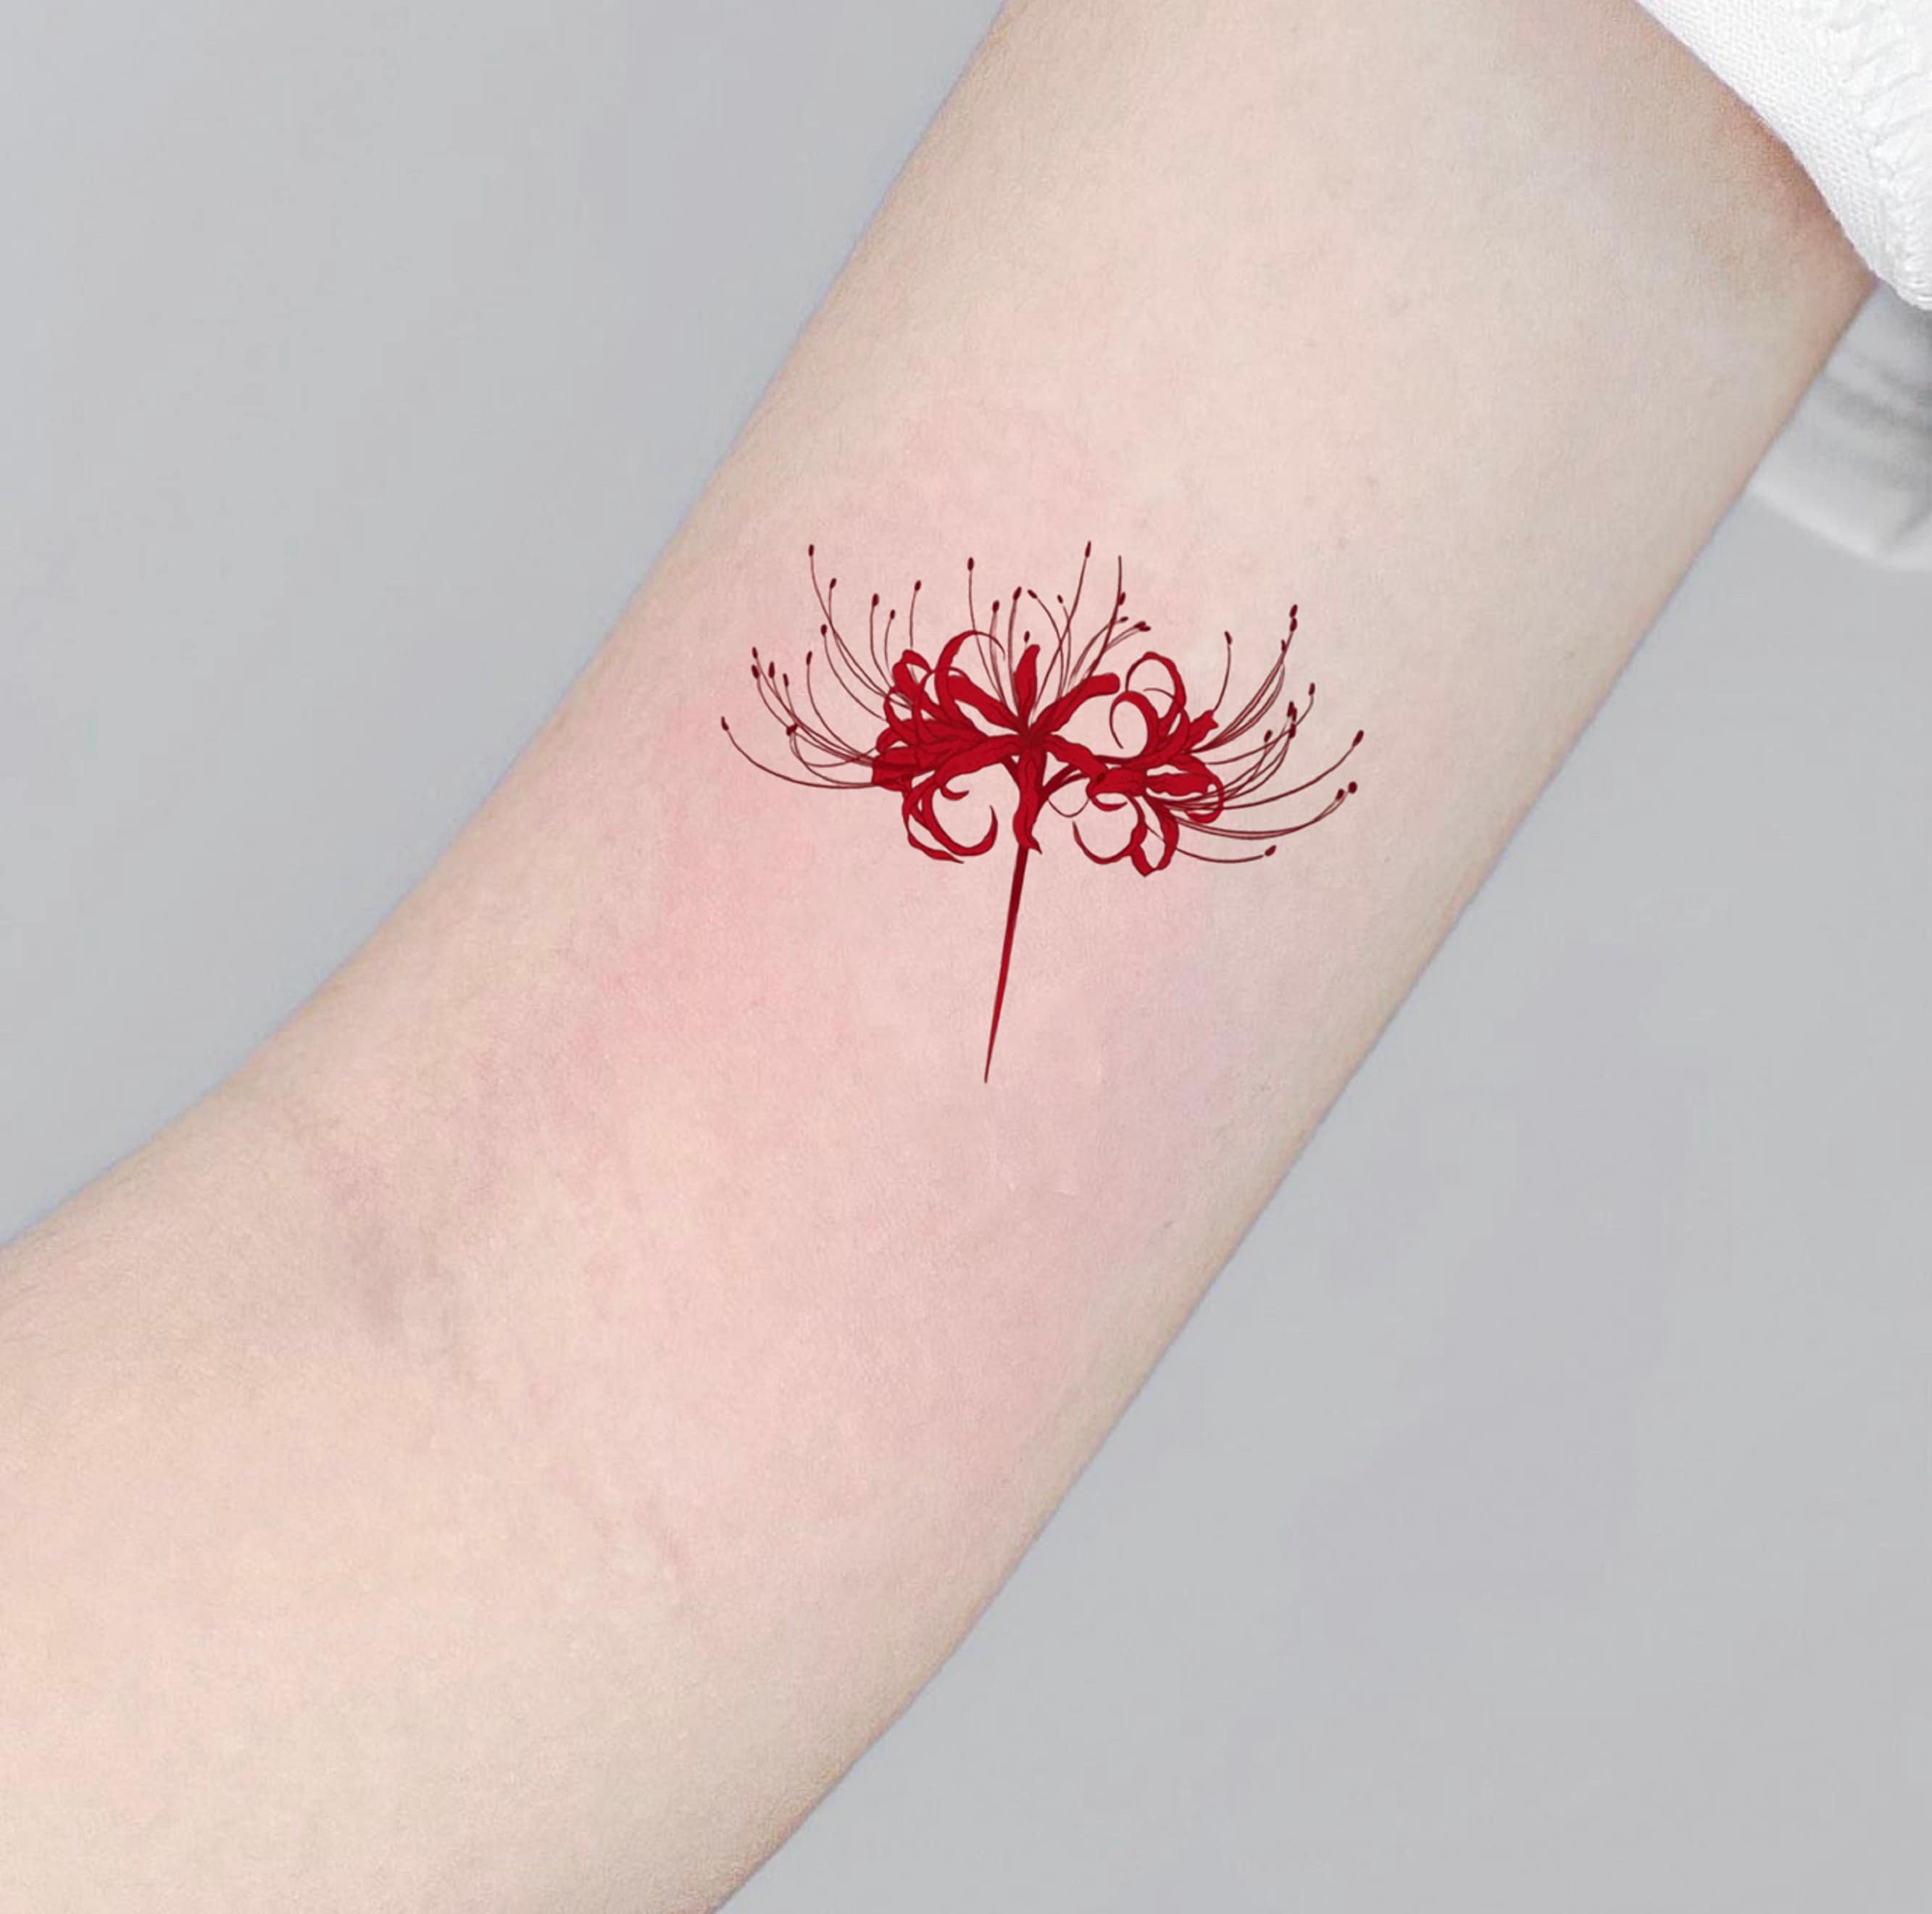 Buy Red Spider Lilies Tattoo Temporary Tattoo Flower Tattoo Online in India   Etsy